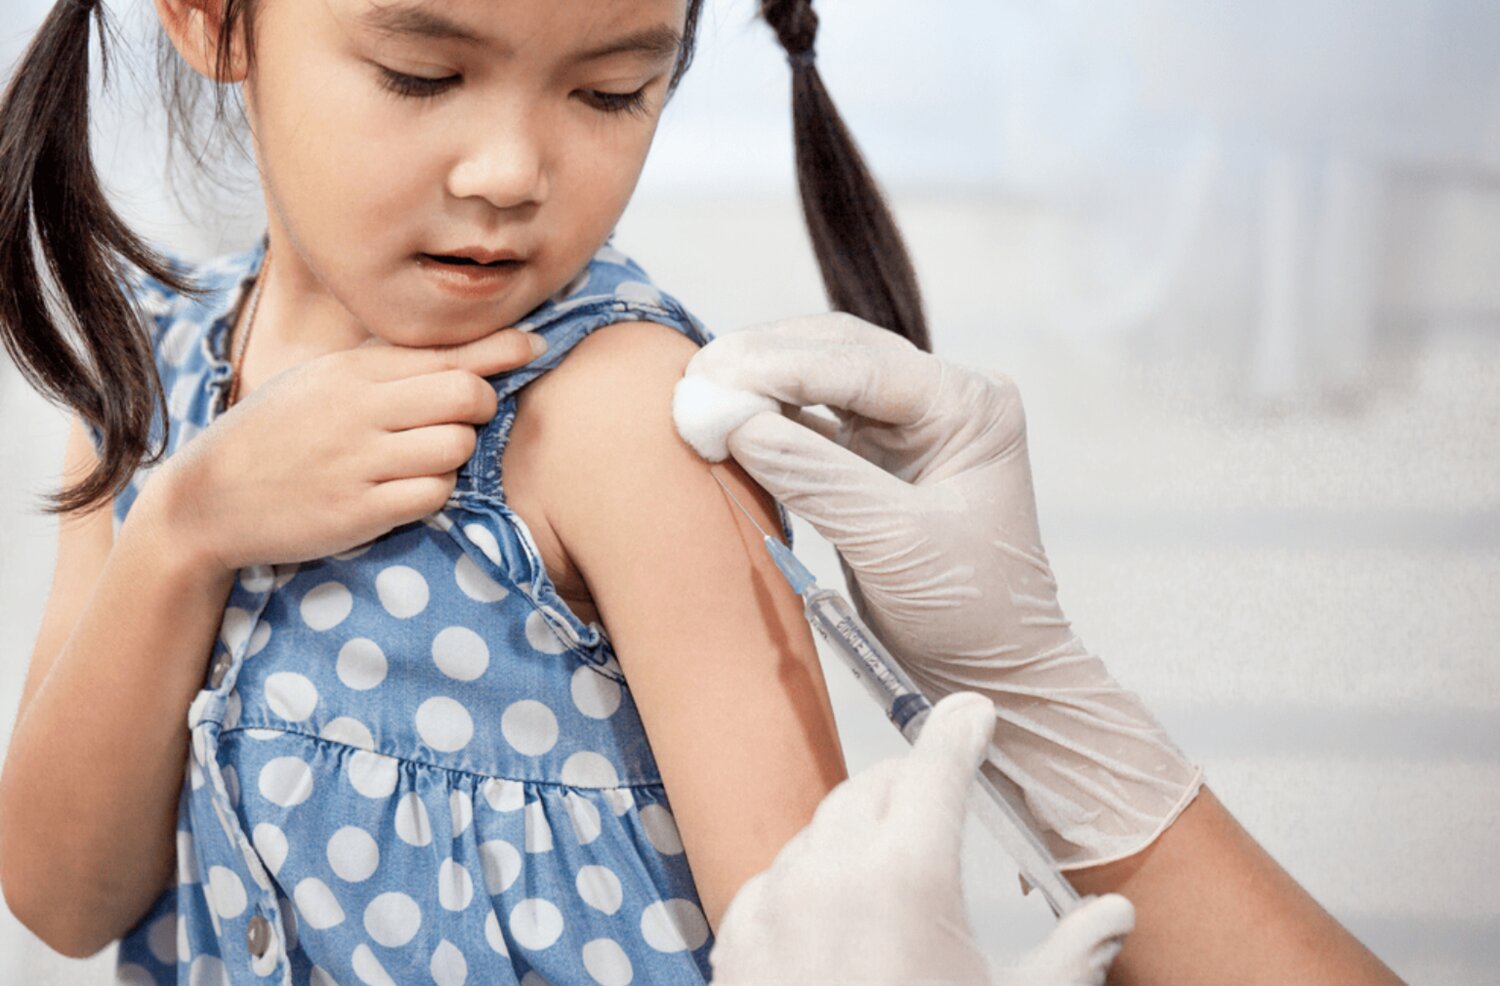 DOH-Orange hosts free vaccination events for back-to-school season